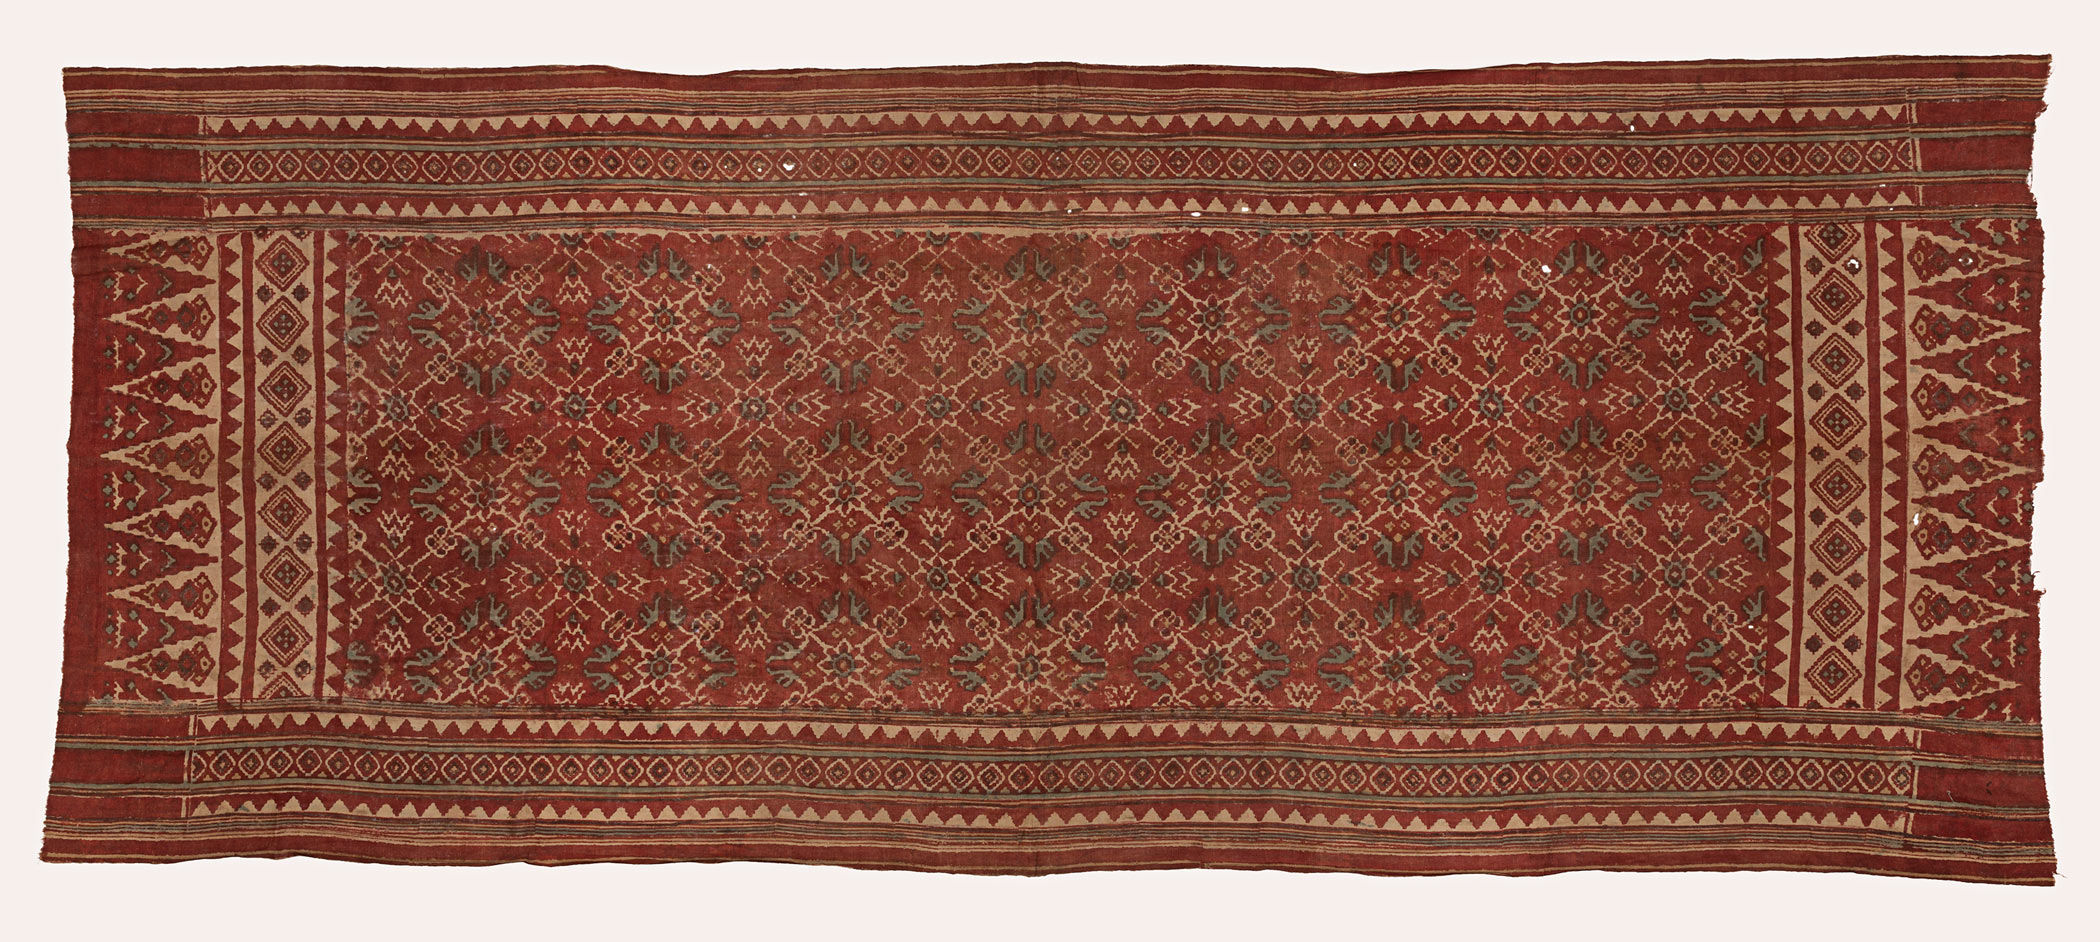 A rectangular cloth with red, green, off white faded patterns. The narrow ends have long triangular patterns while the wider borders have symmetrical triangles between horizontal bands of intricate motifs.